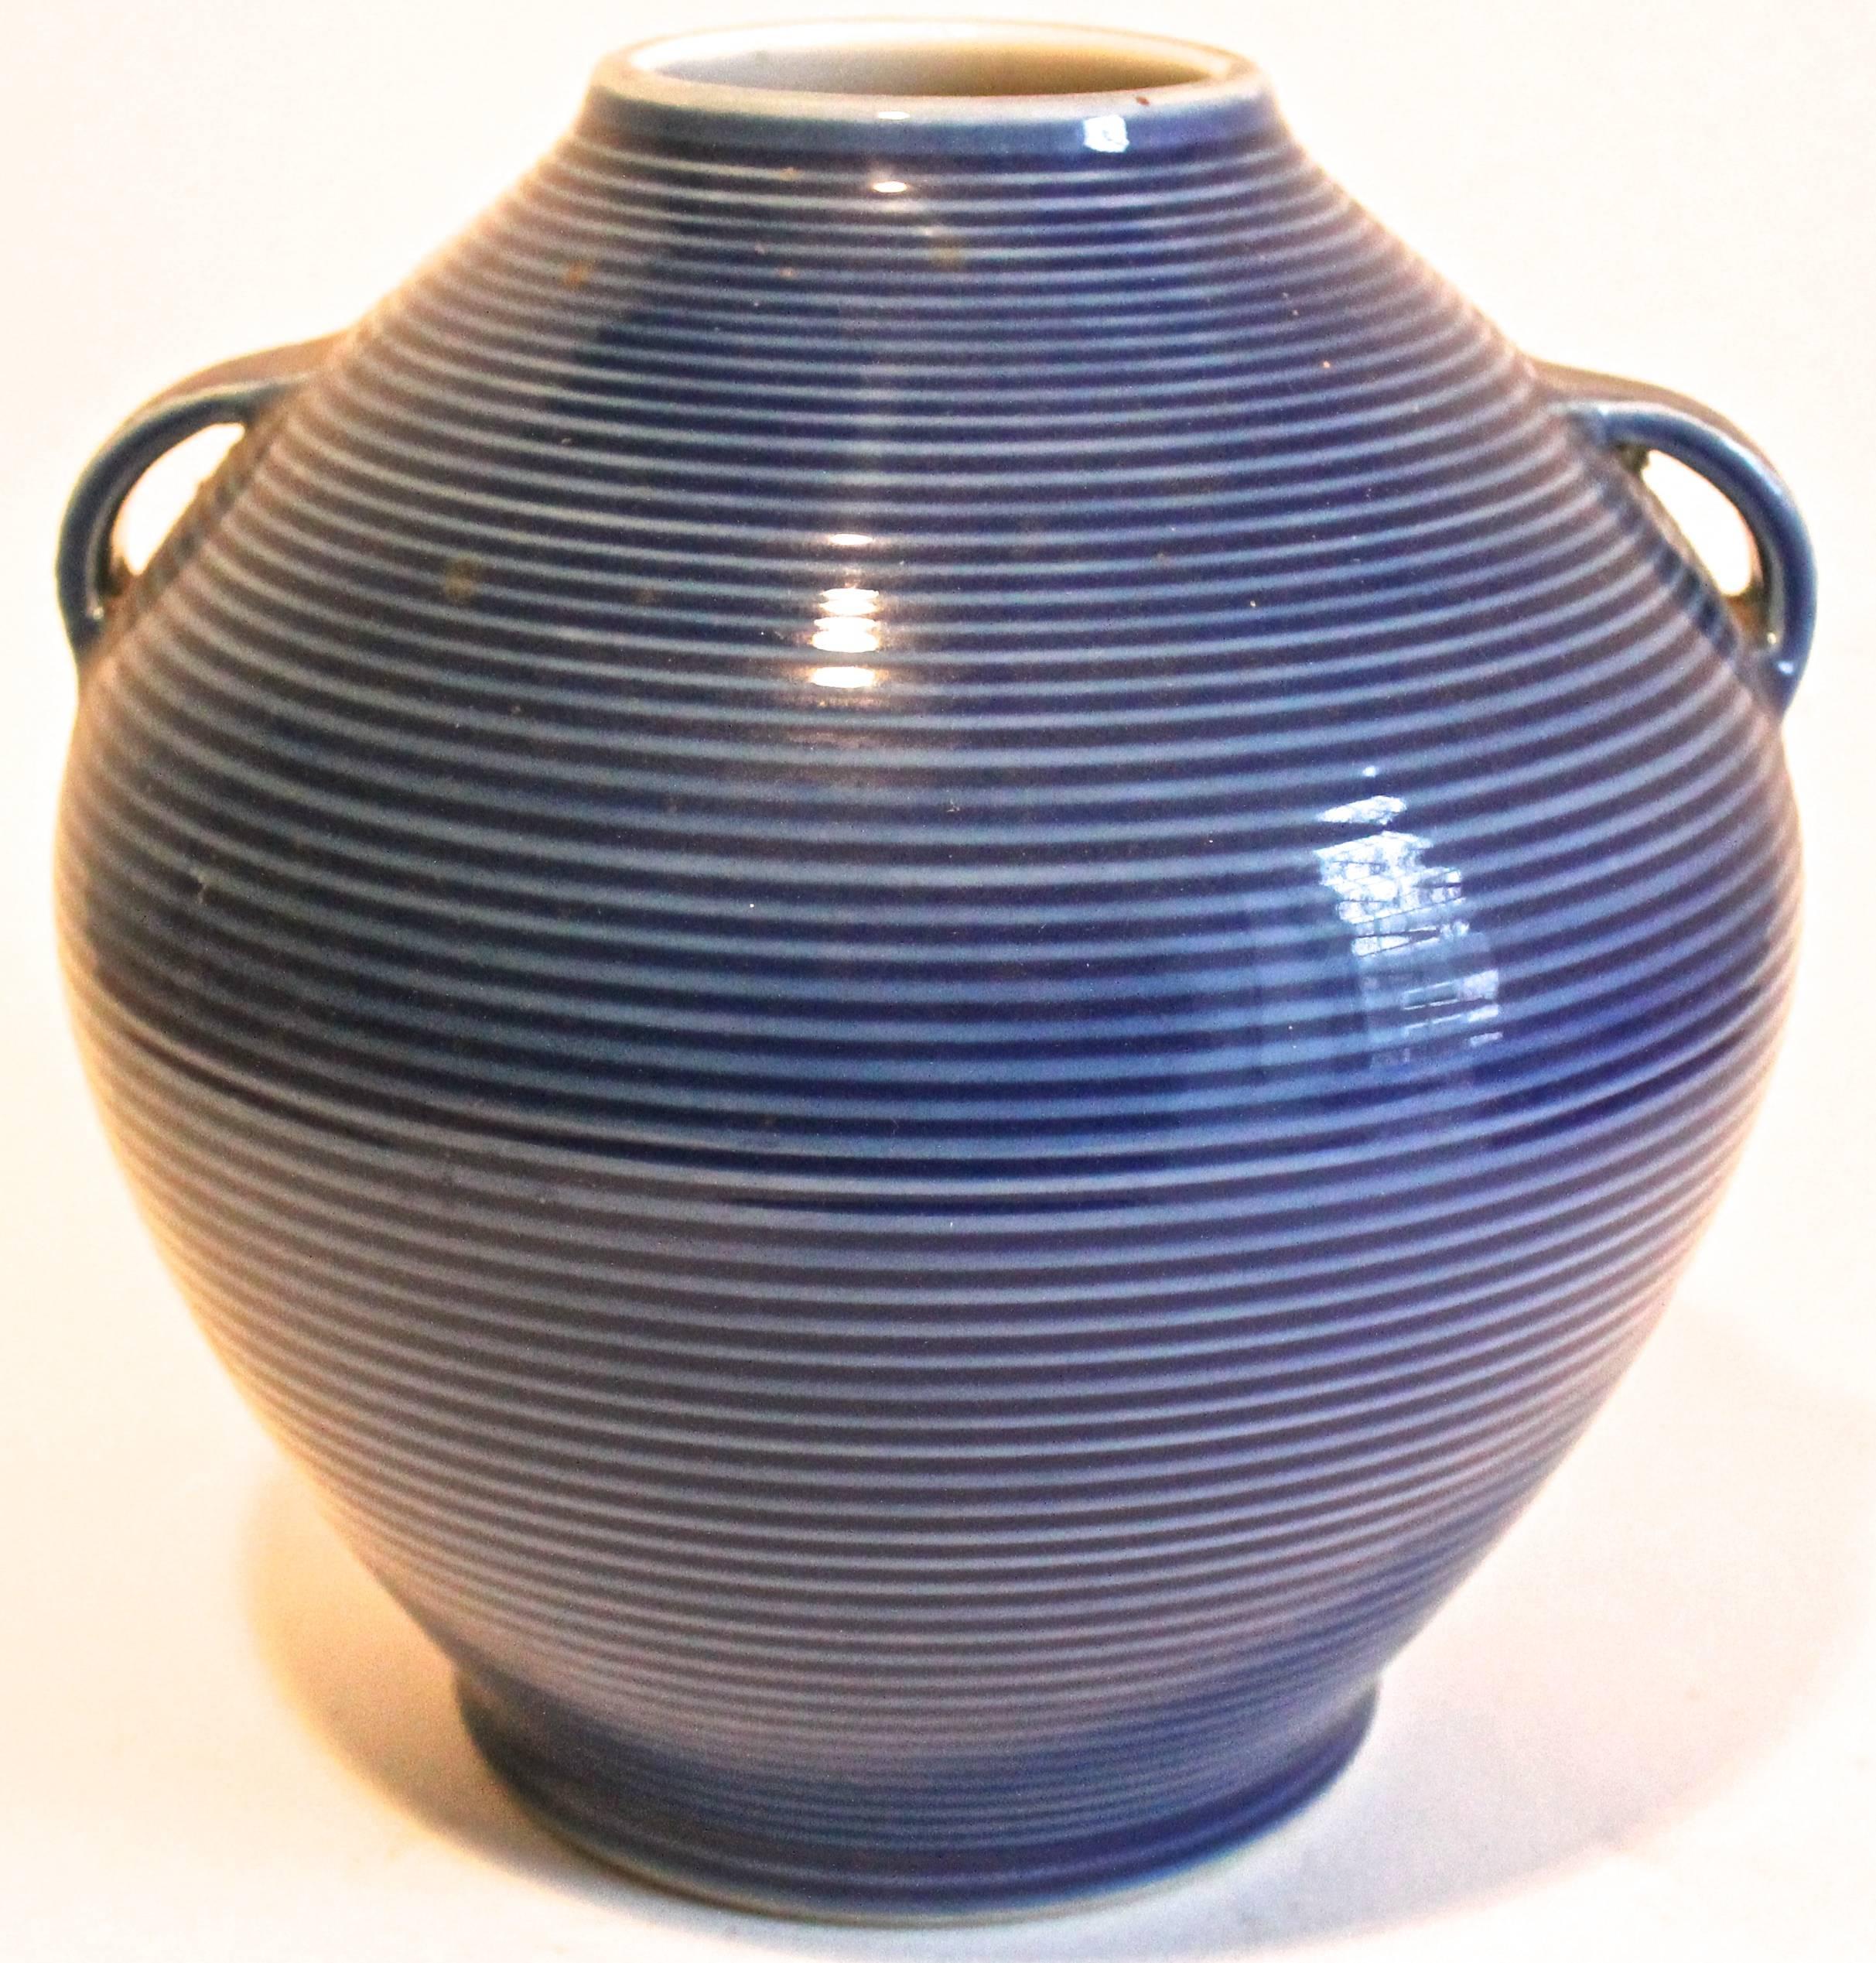 A rare and beautiful vase, an unusual Fukagawa without any oriental naturalistic overtones.